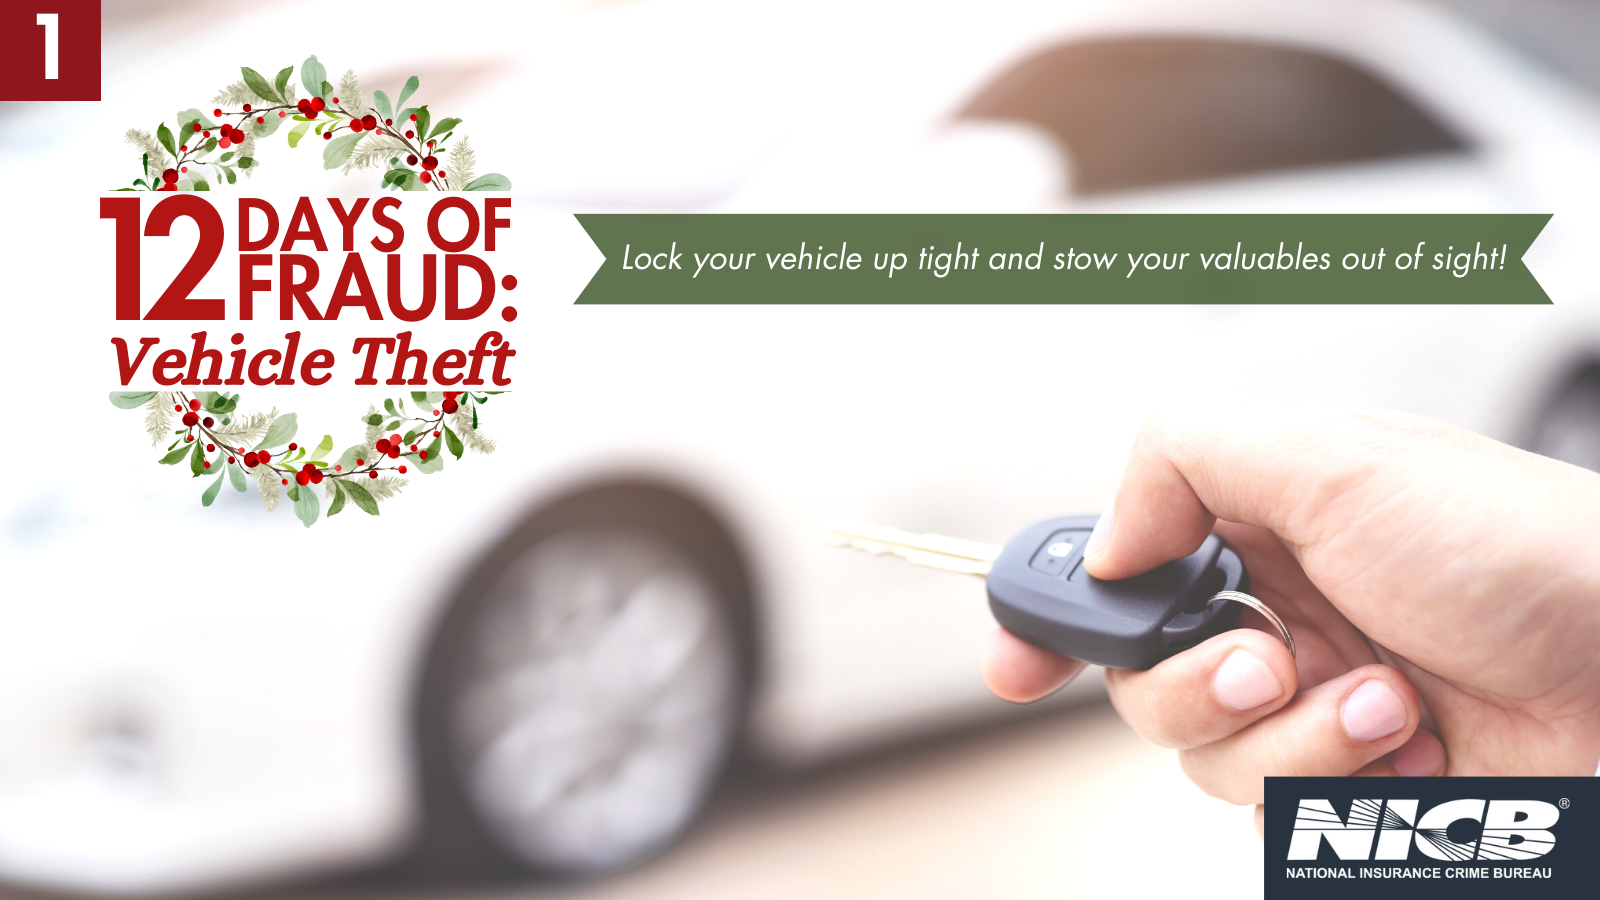 Lock your vehicle up tight and stow your vehicles out of sight!